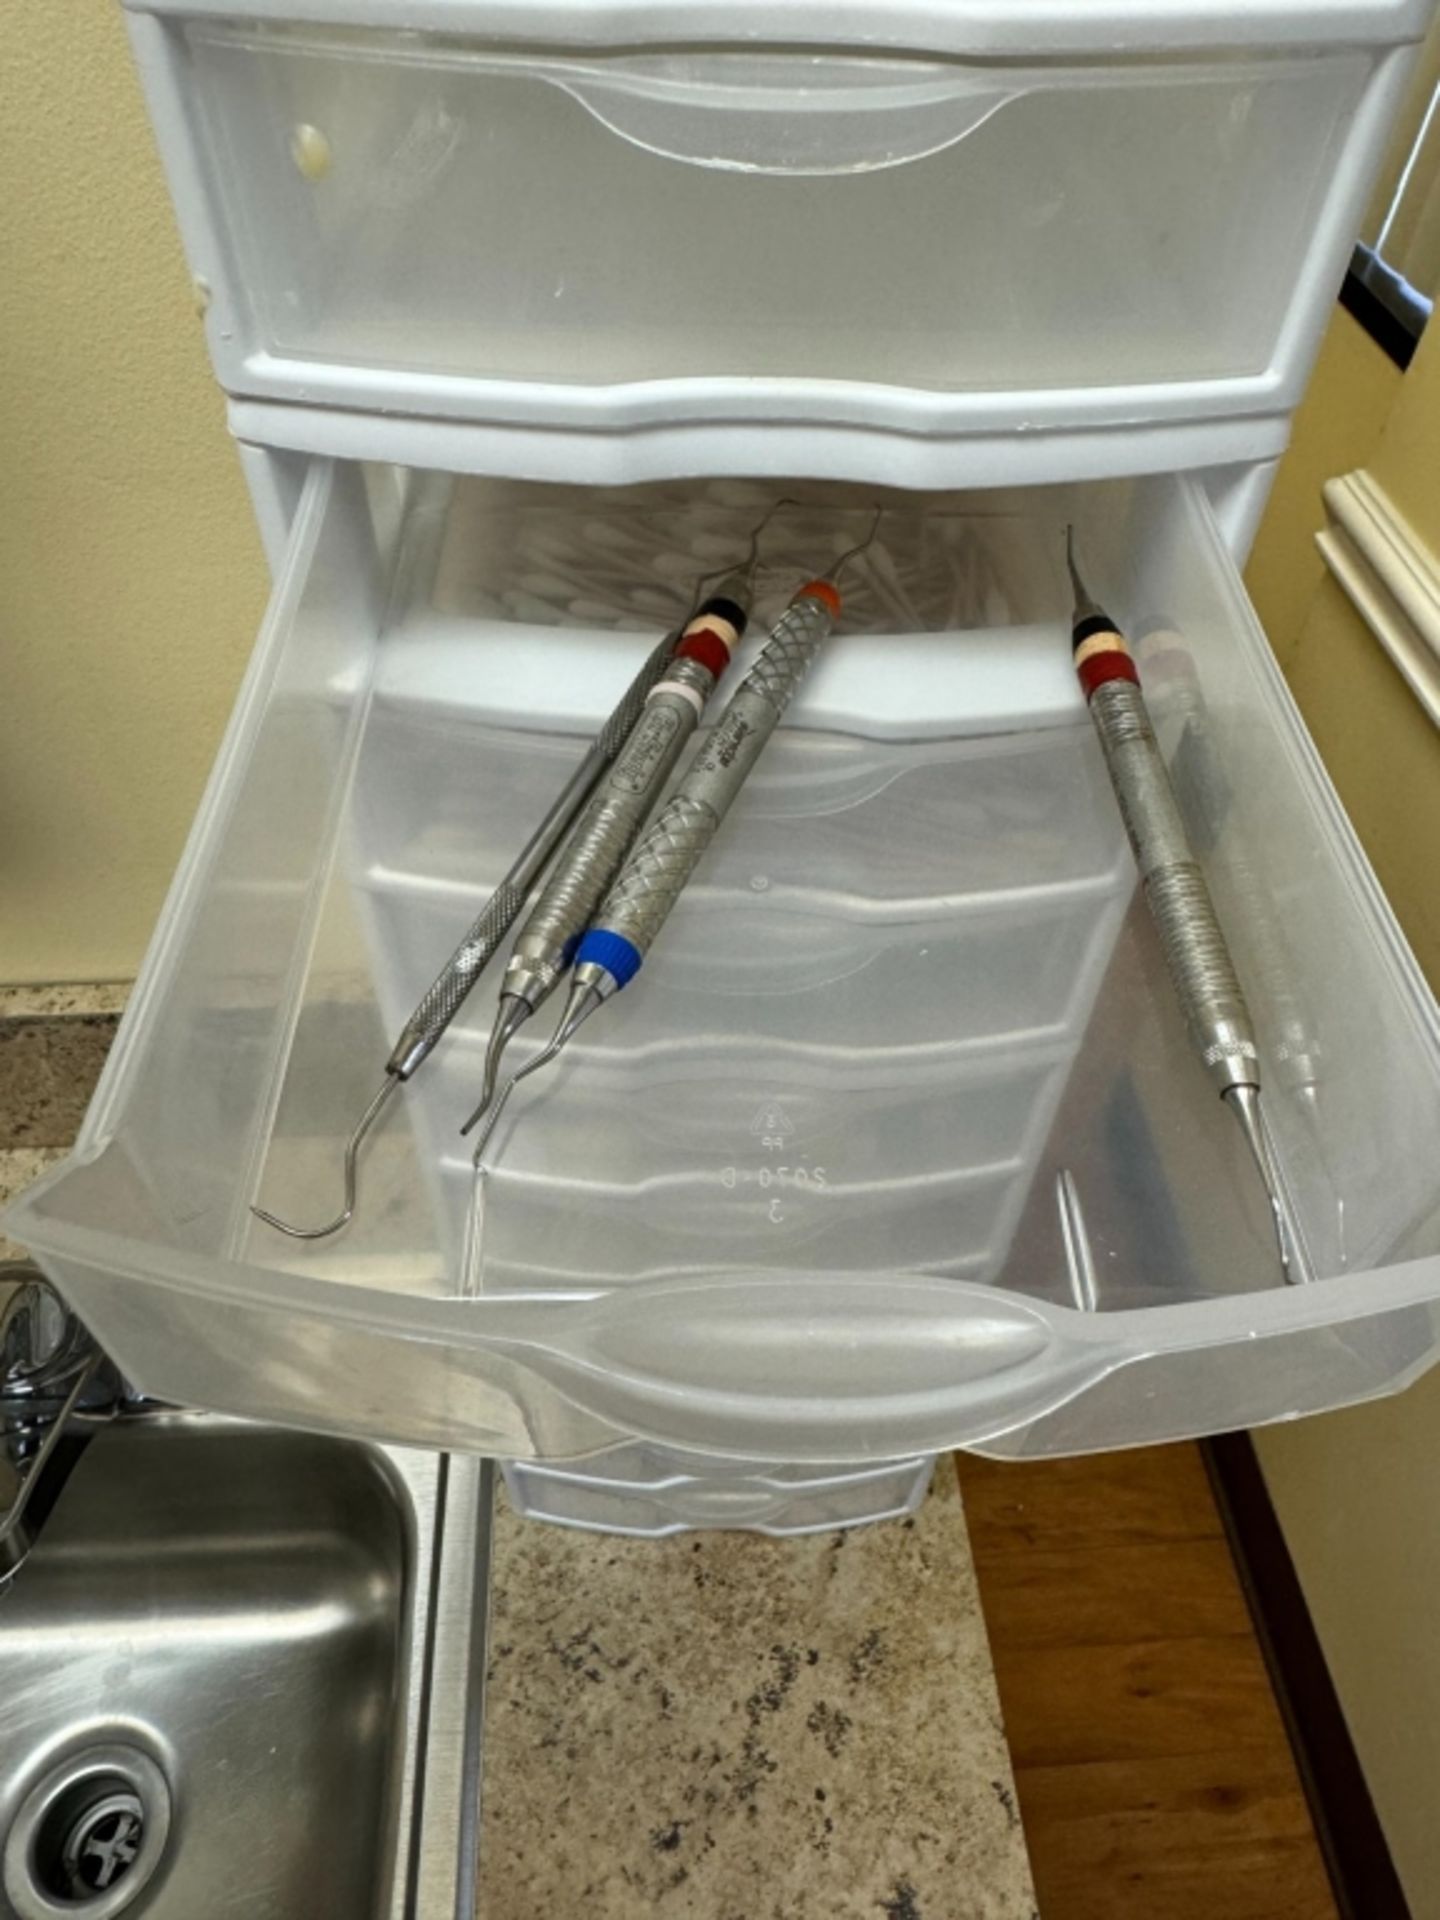 LOT CONSISTING OF SINGLE USE DENTAL SUPPLIES - Image 2 of 4